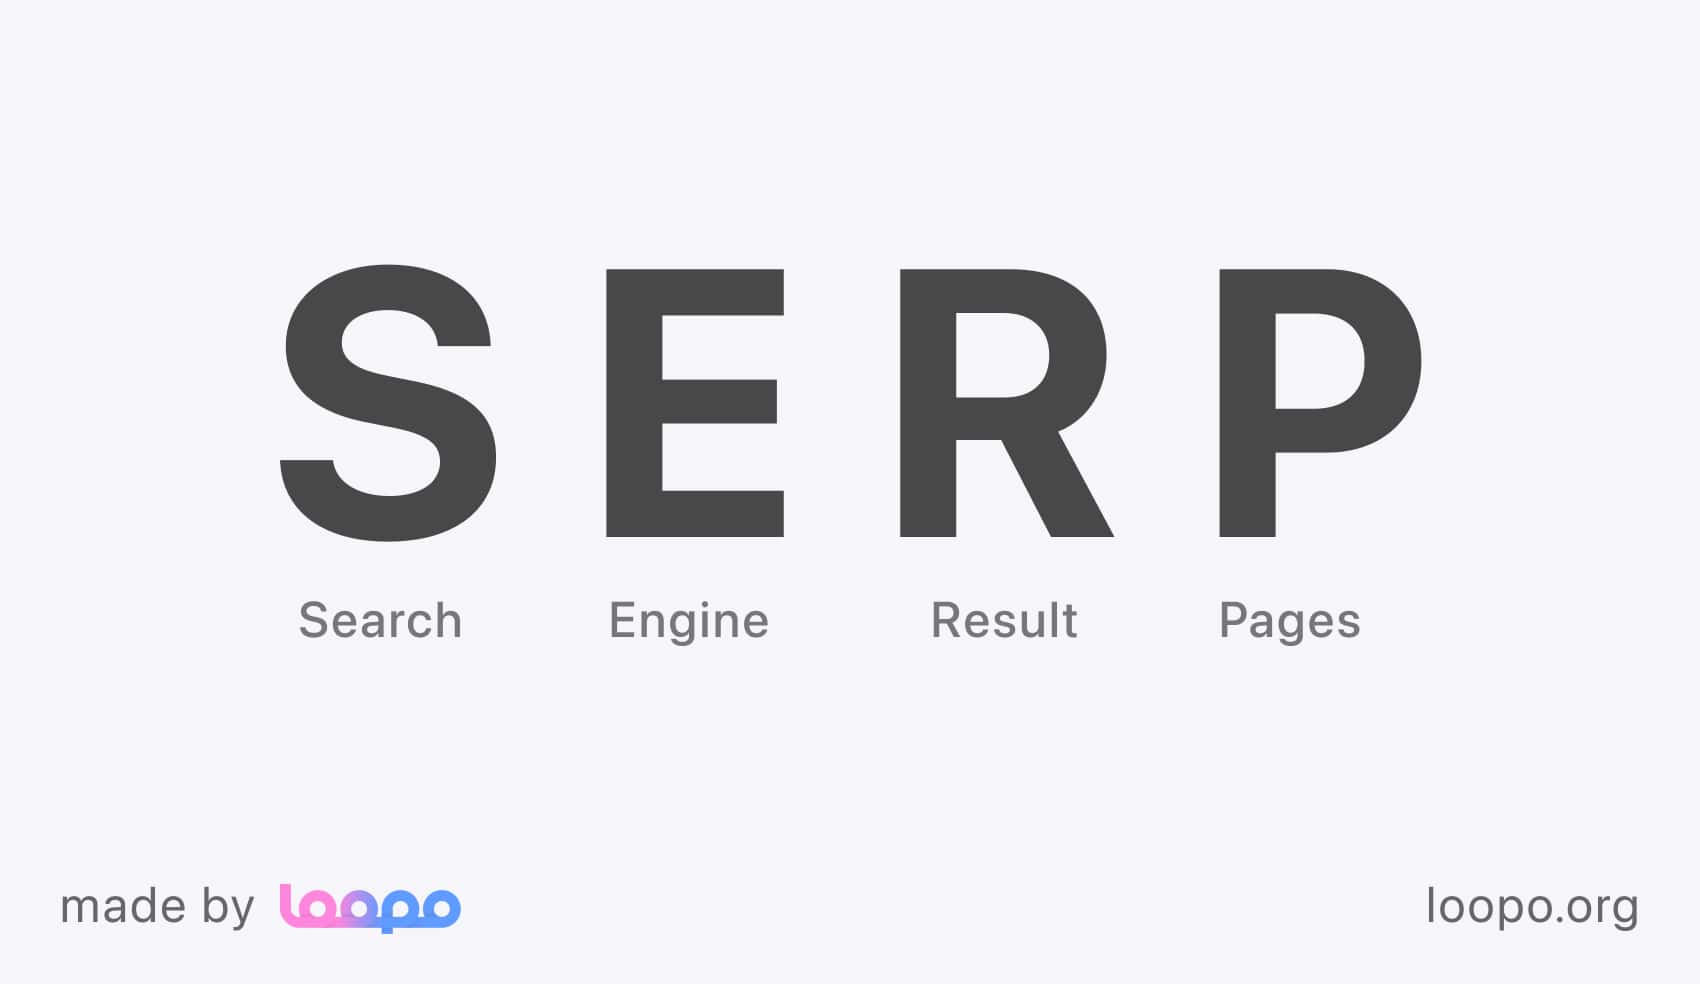 What SERP means